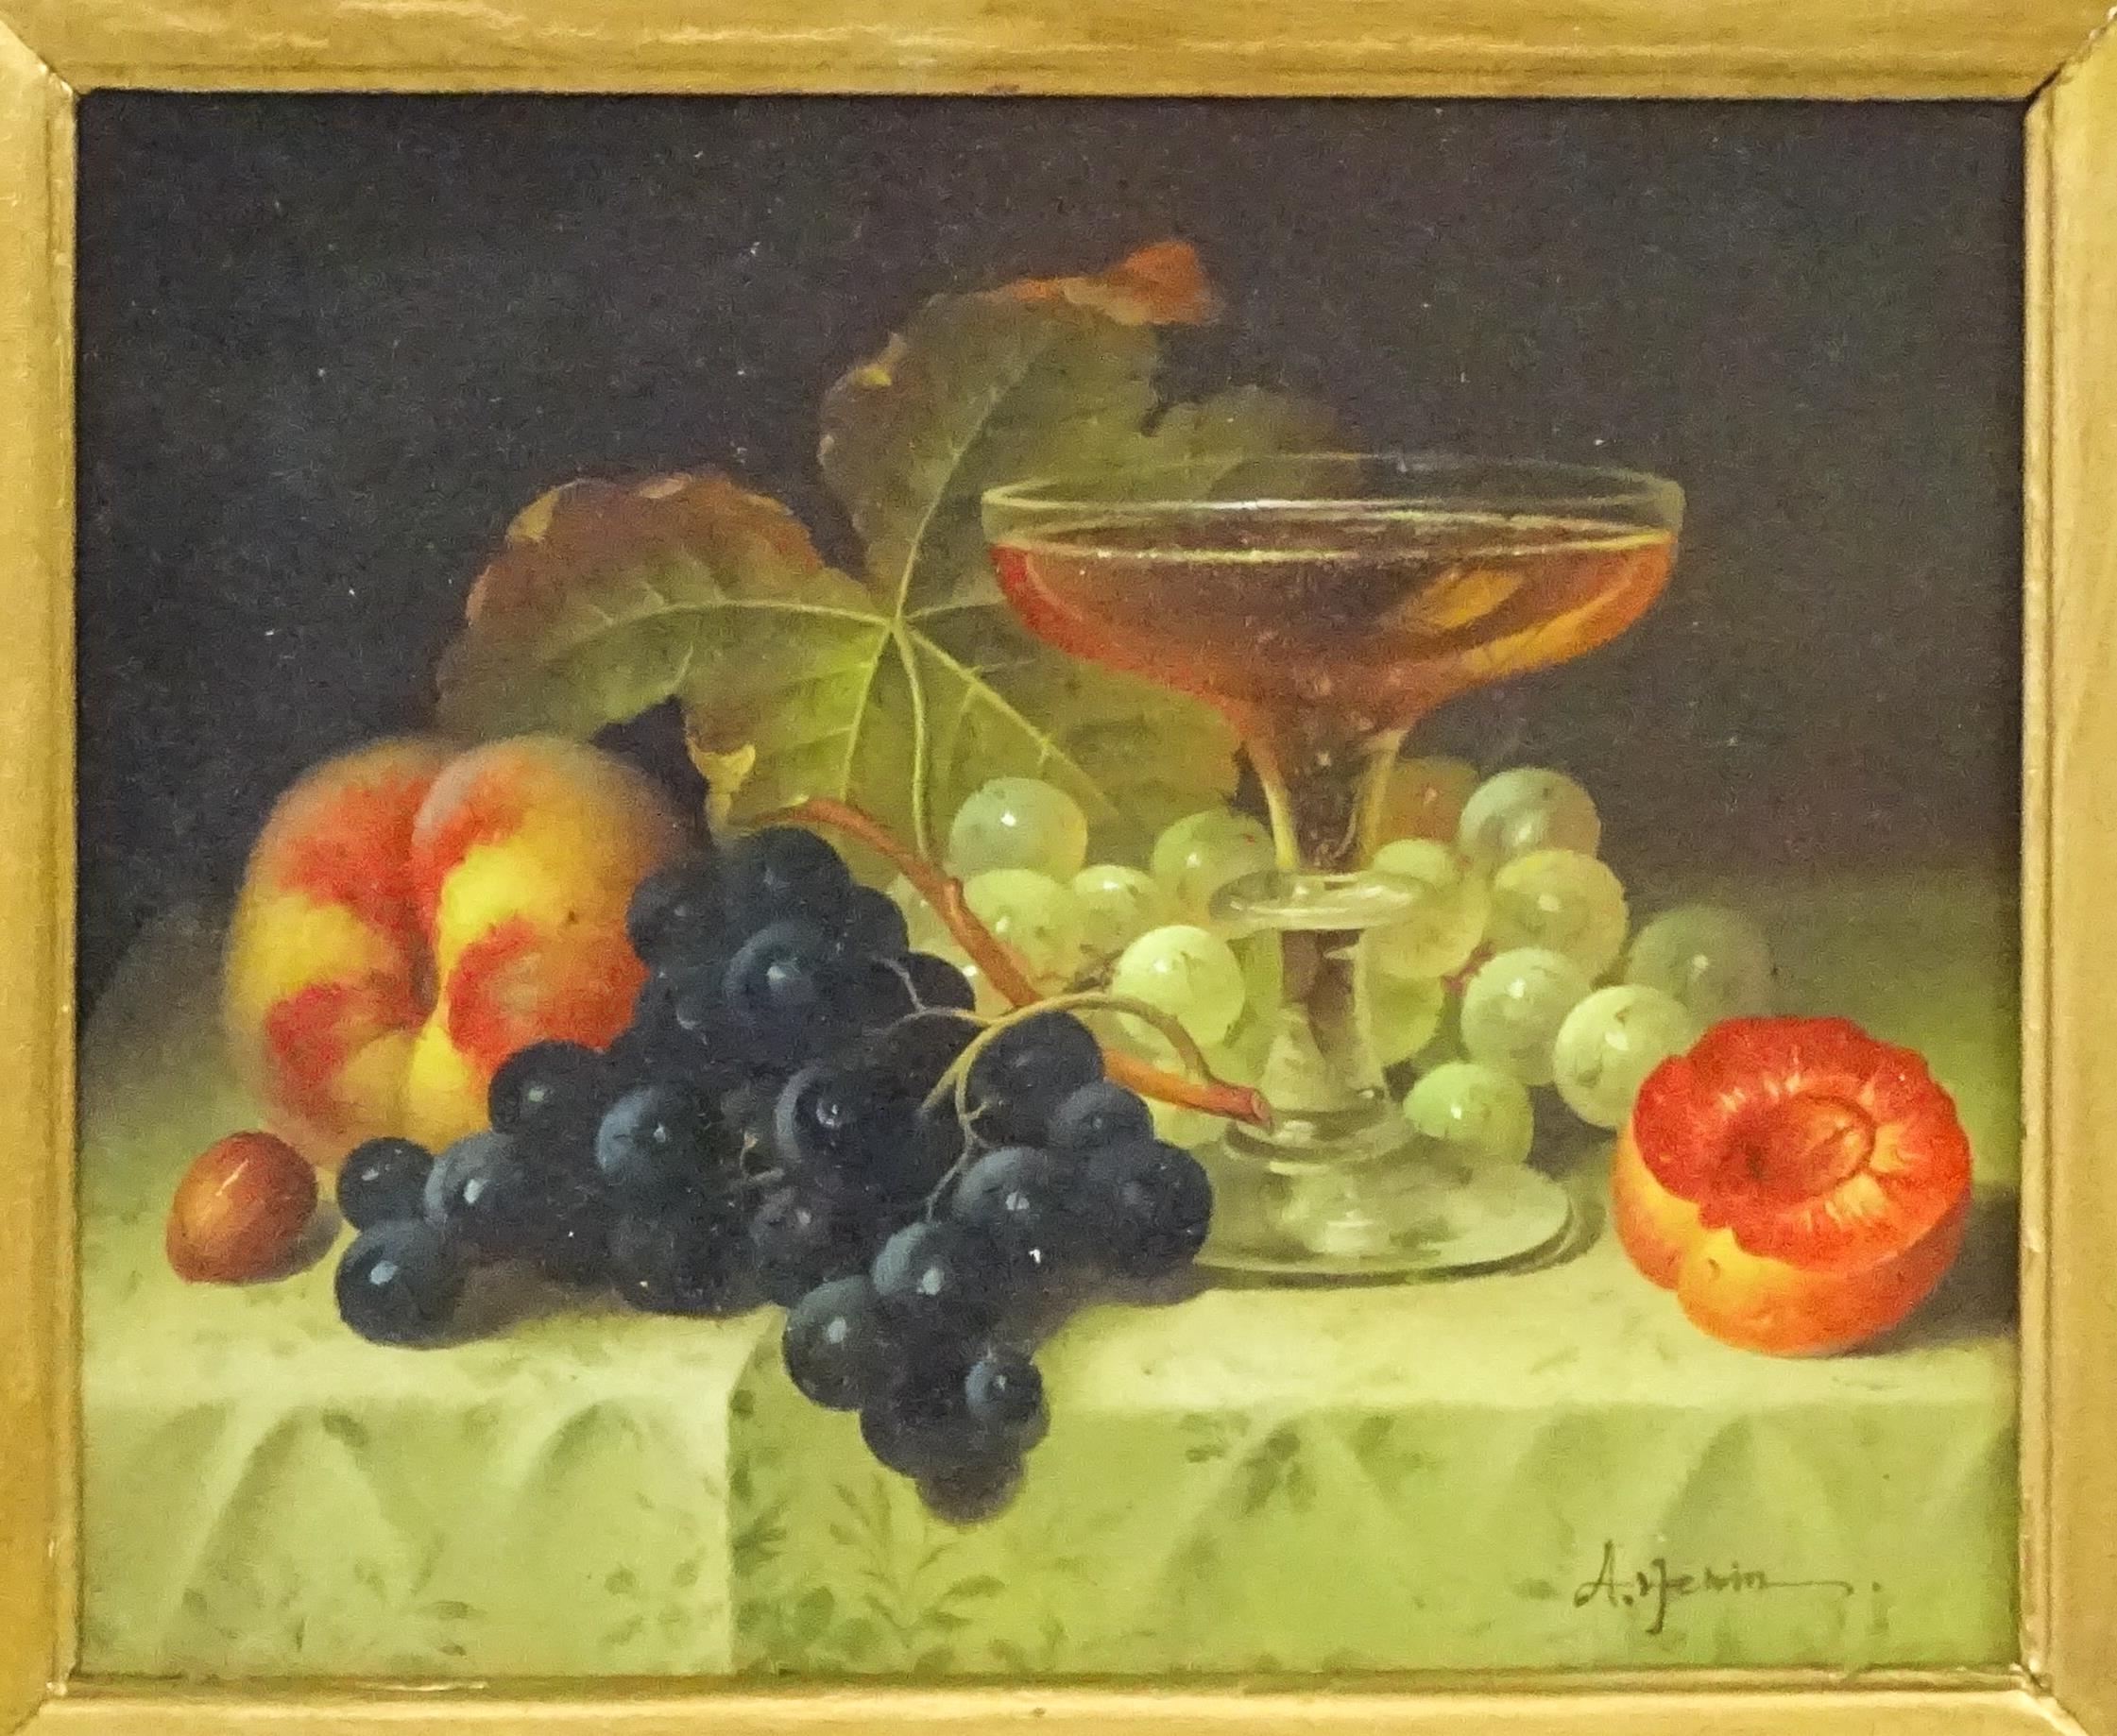 Artemis, 20th century, Oil on panel, A still life study with fruit and a glass on a table. Signed - Image 3 of 4